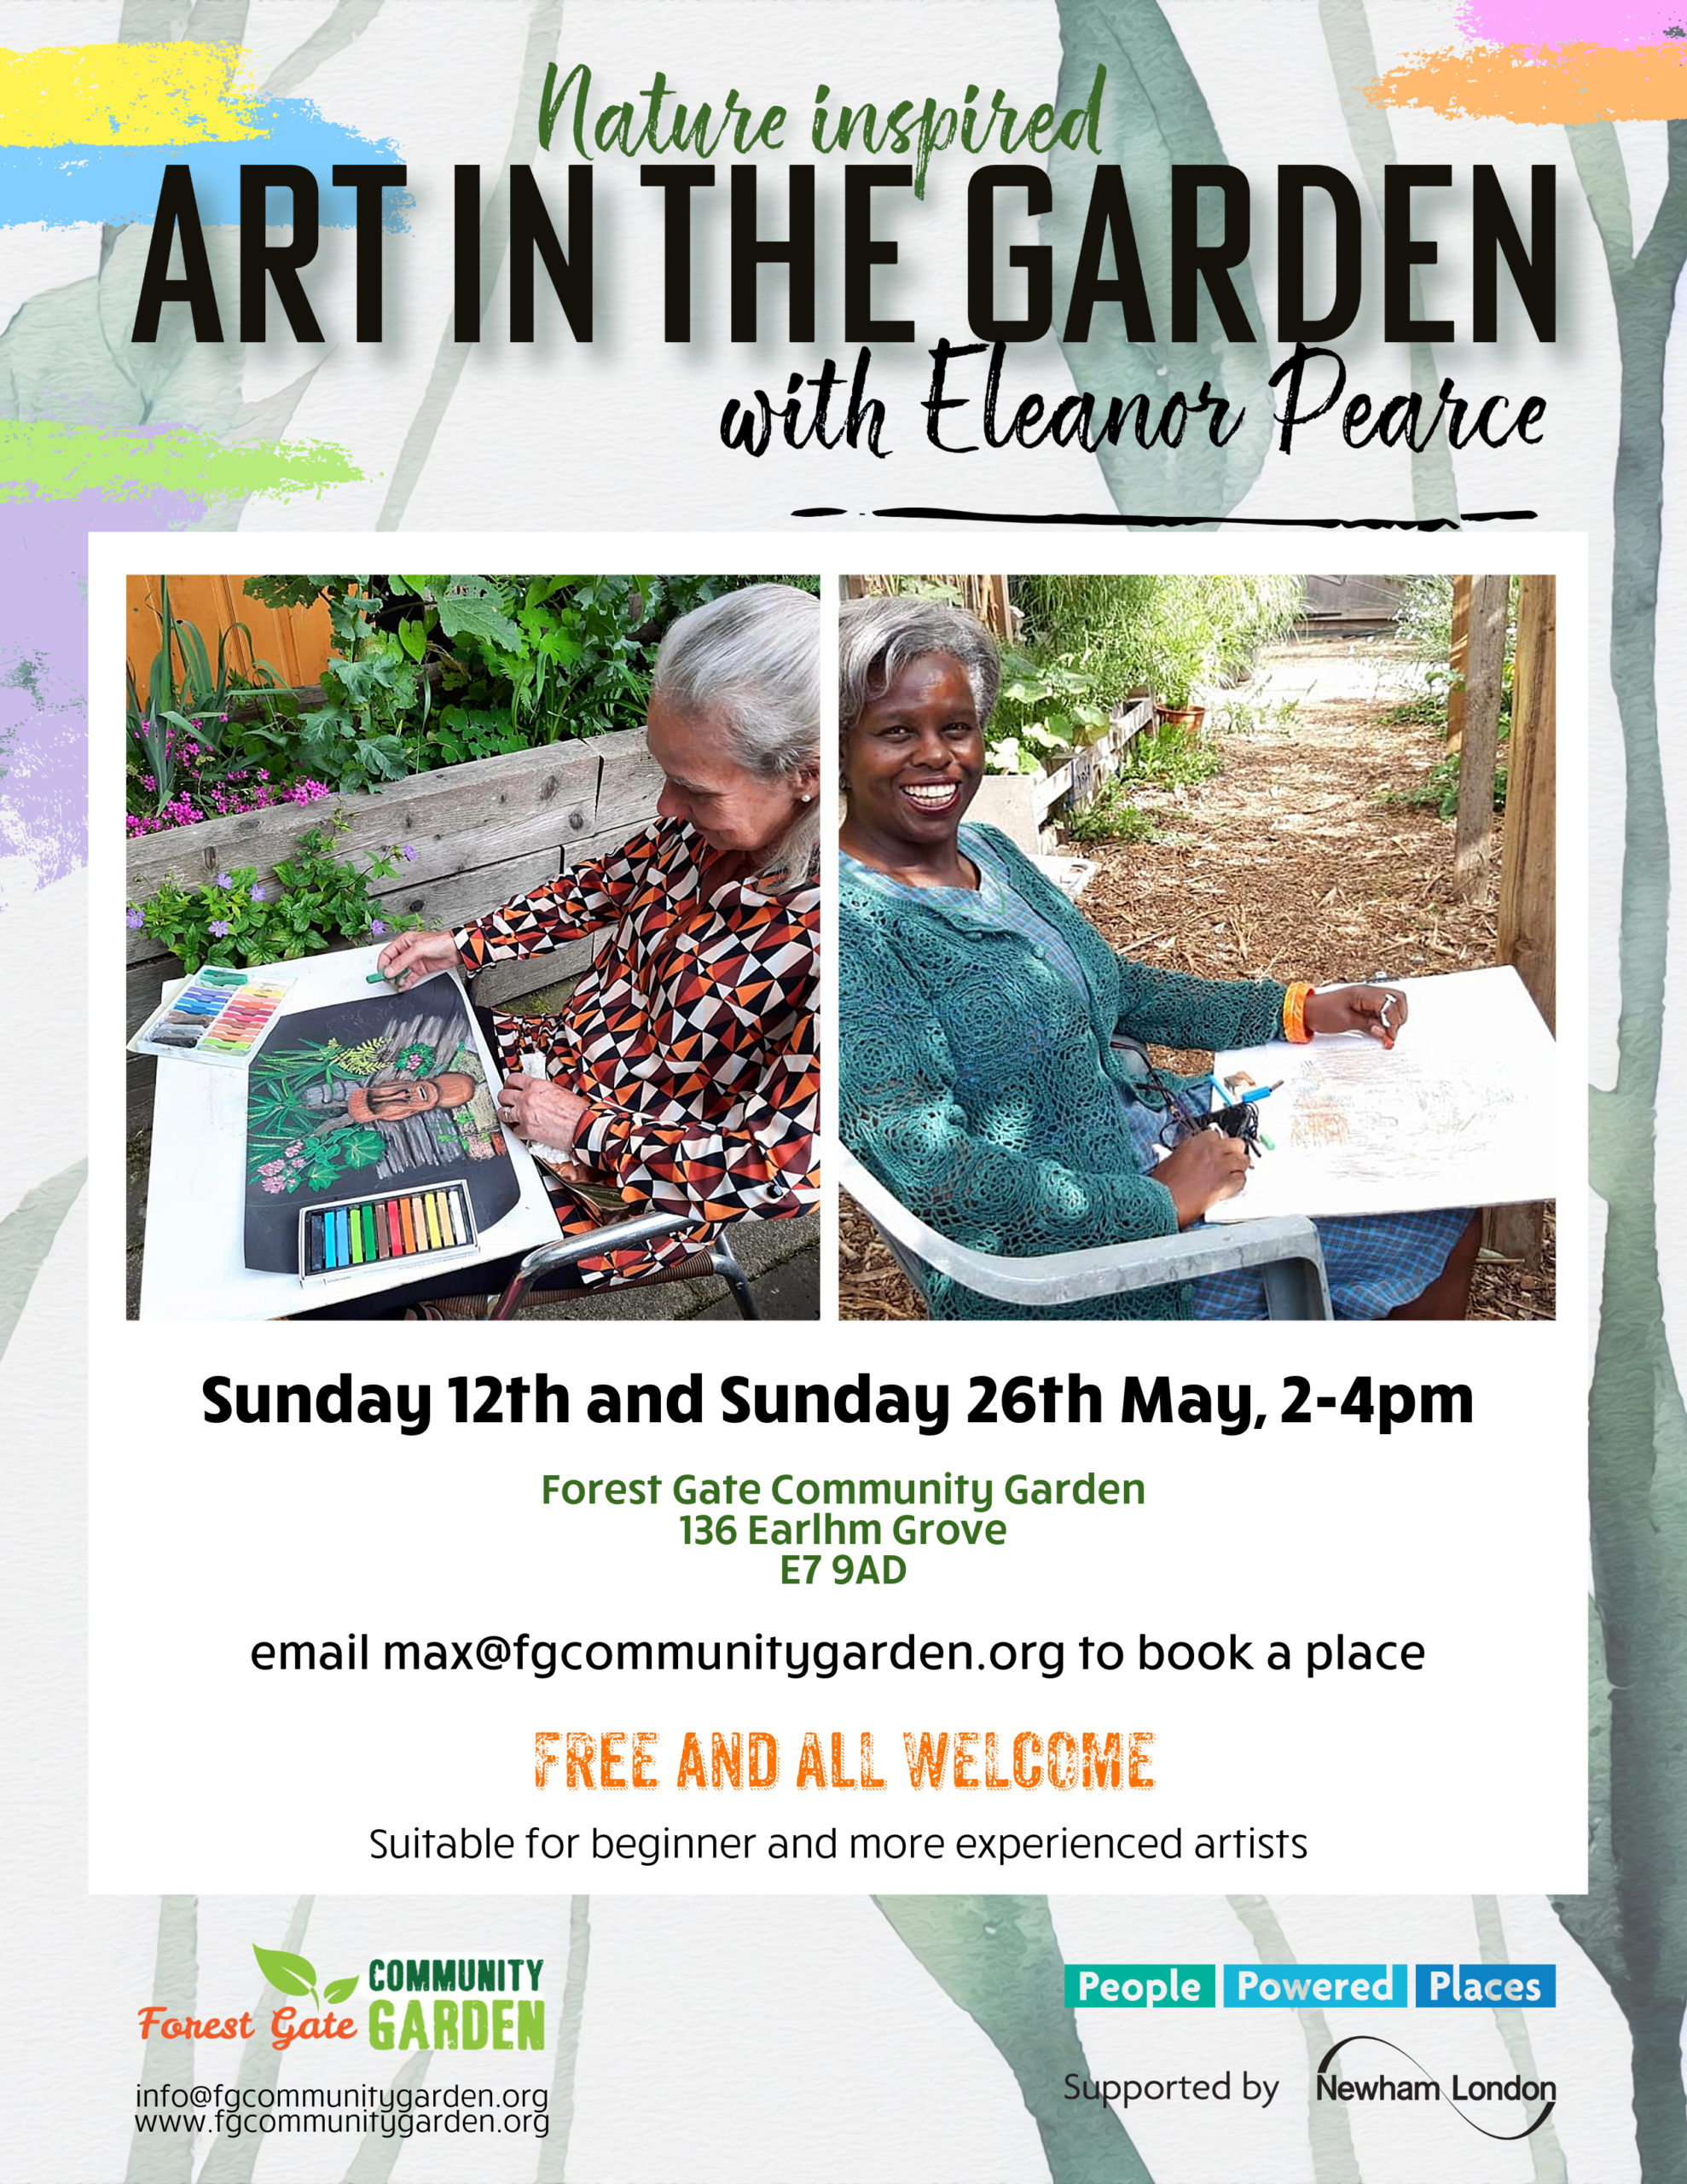 Flyer for the Art in the Garden workshop with Eleanor Pearce